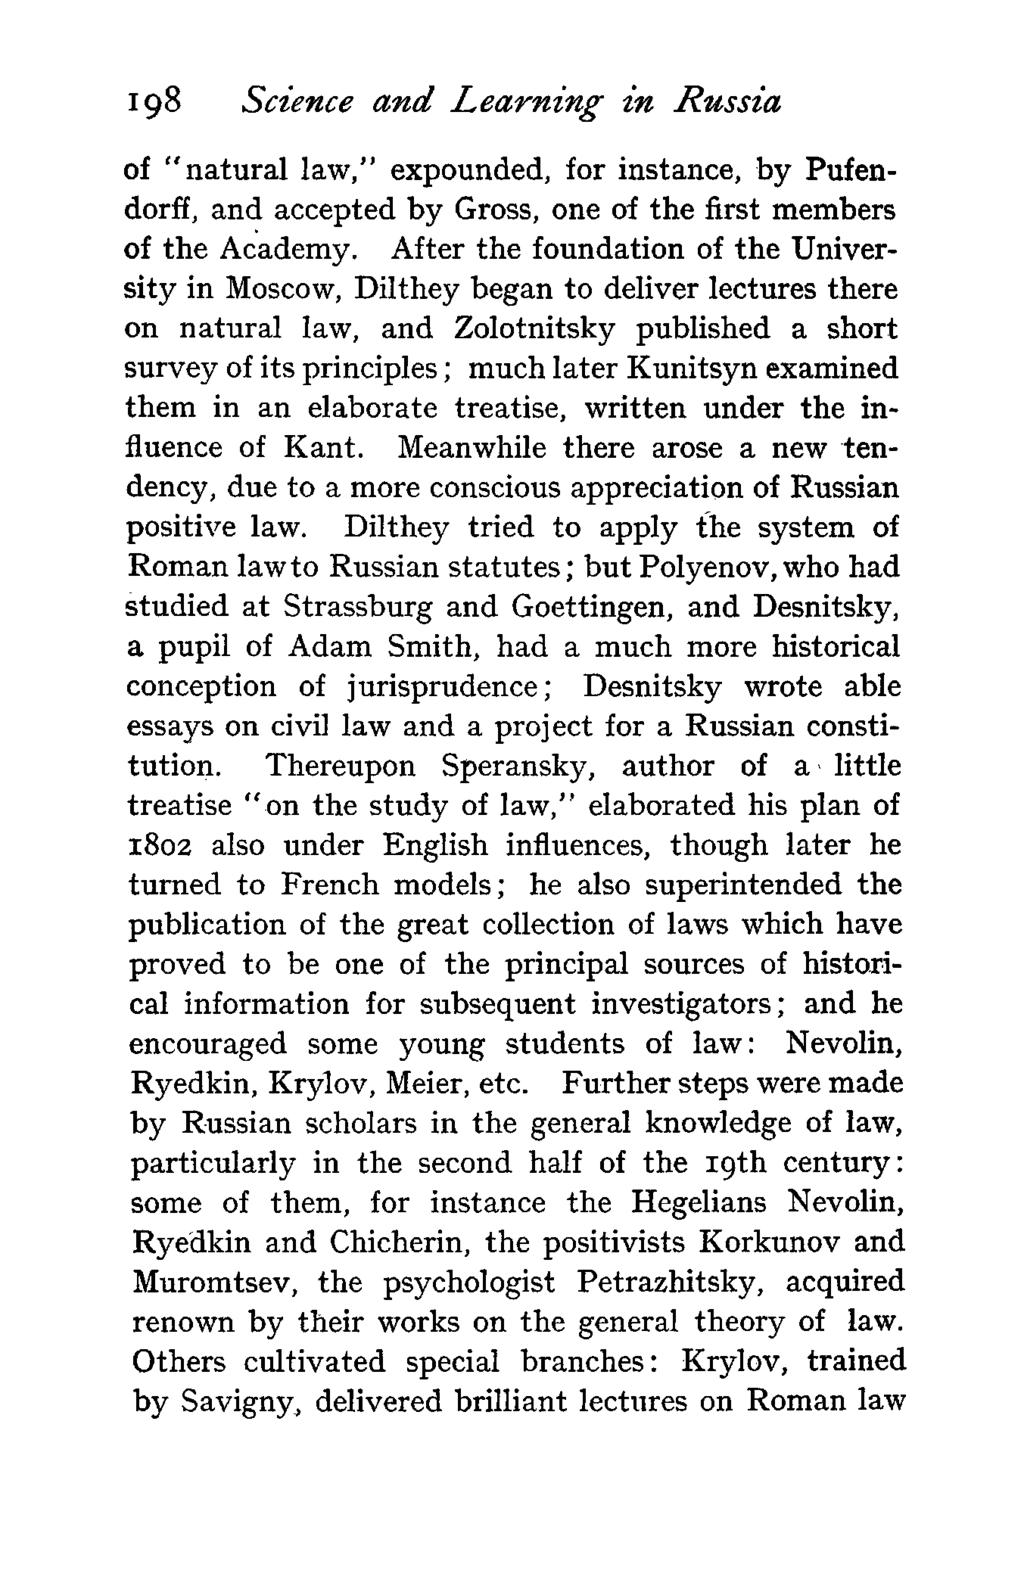 198 Science and Learning in Russia of "natural law," expounded, for instance, by Pufendorff, and accepted by Gross, one of the first members of the Academy.